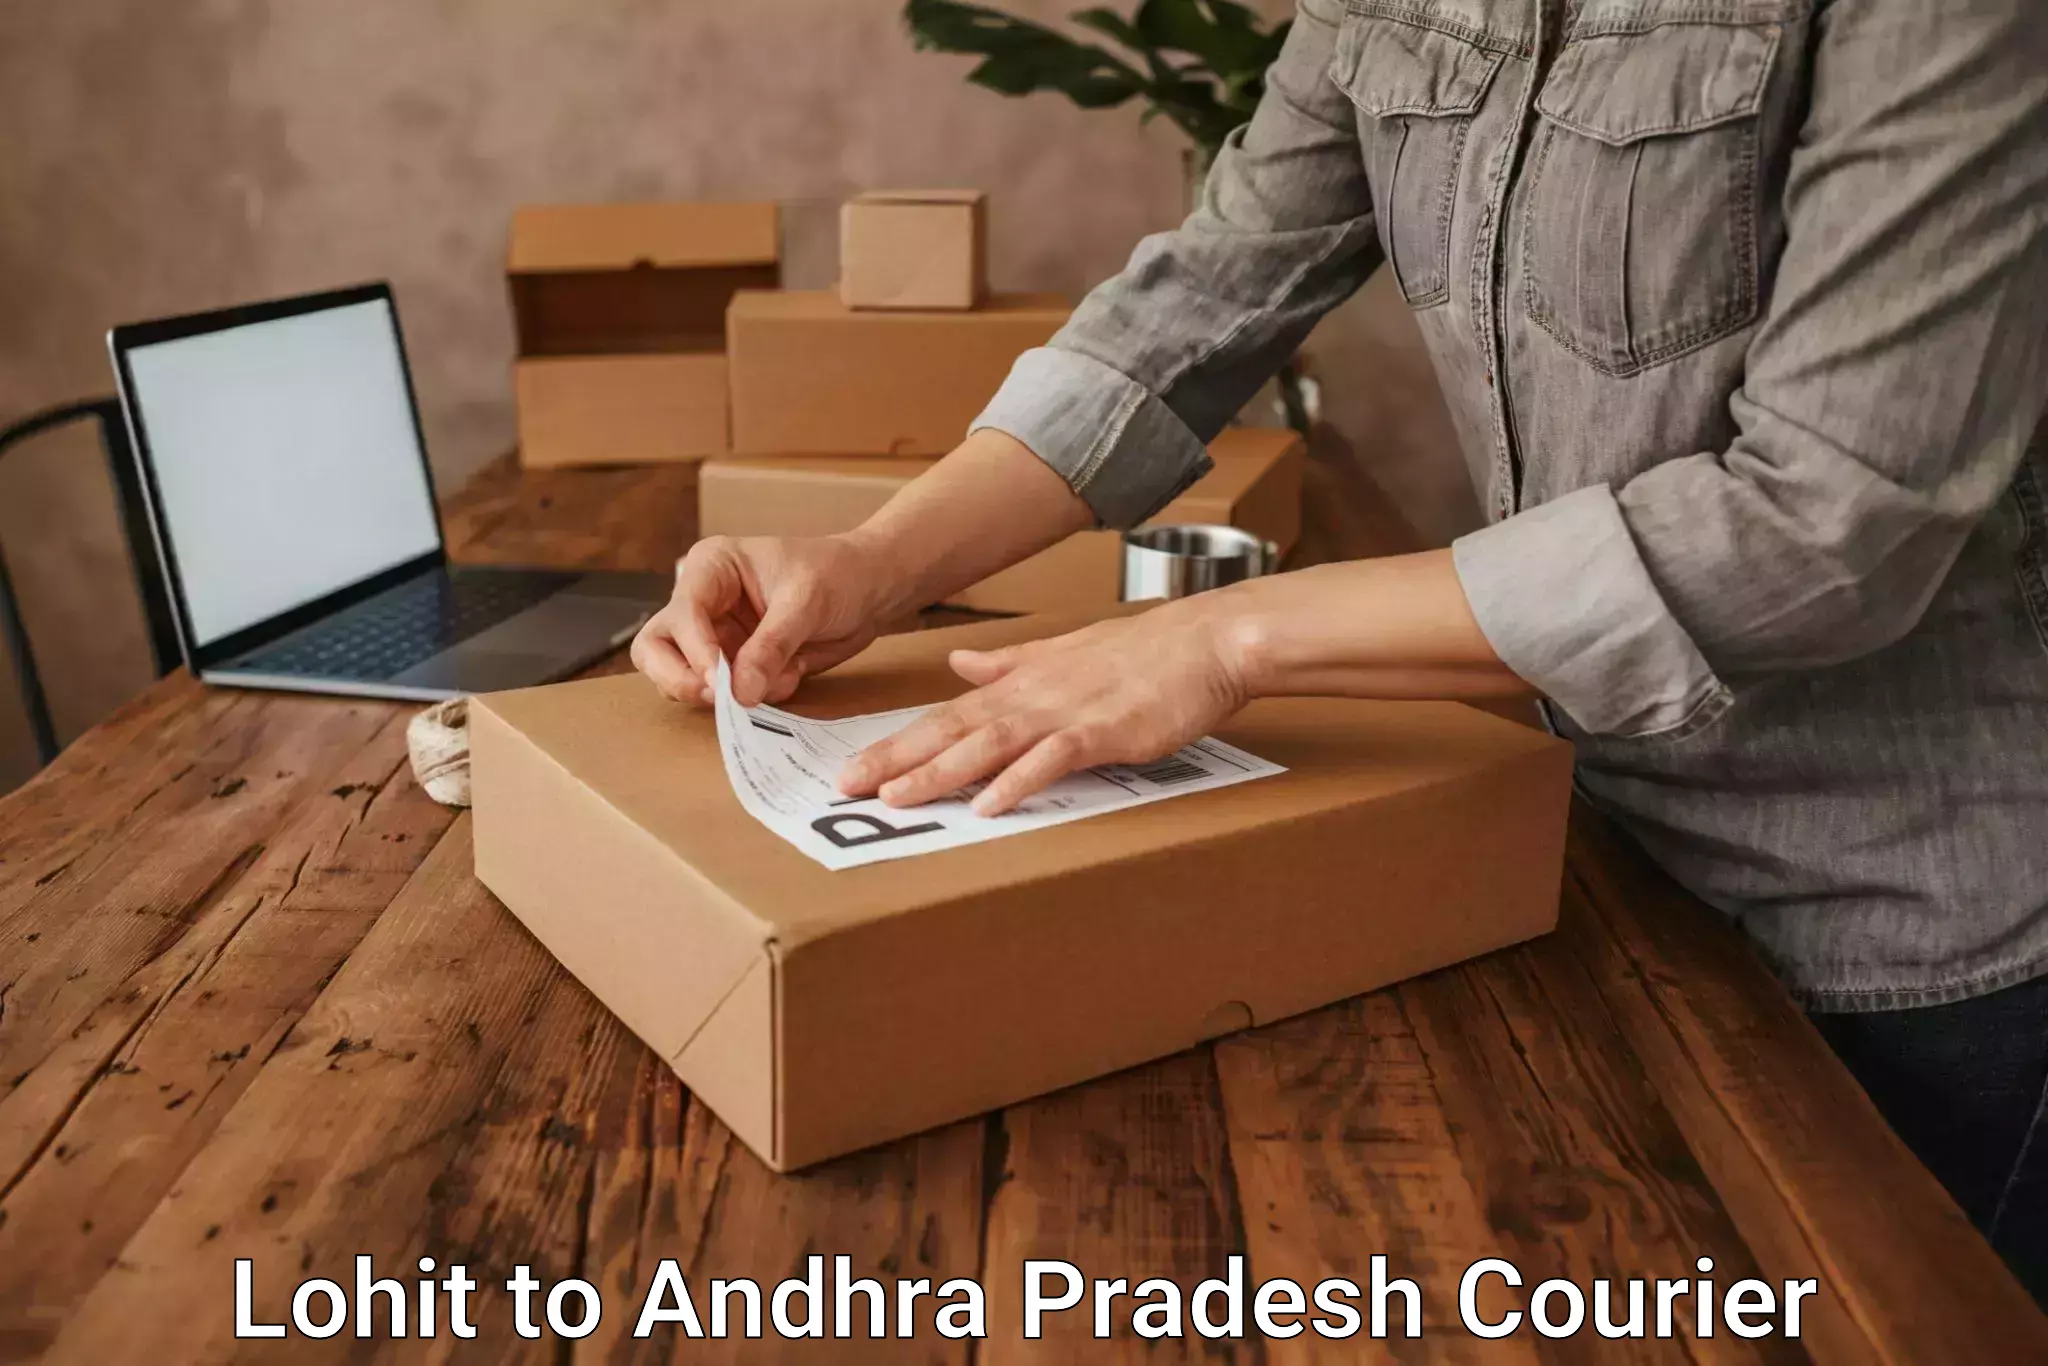 Affordable parcel service in Lohit to Visakhapatnam